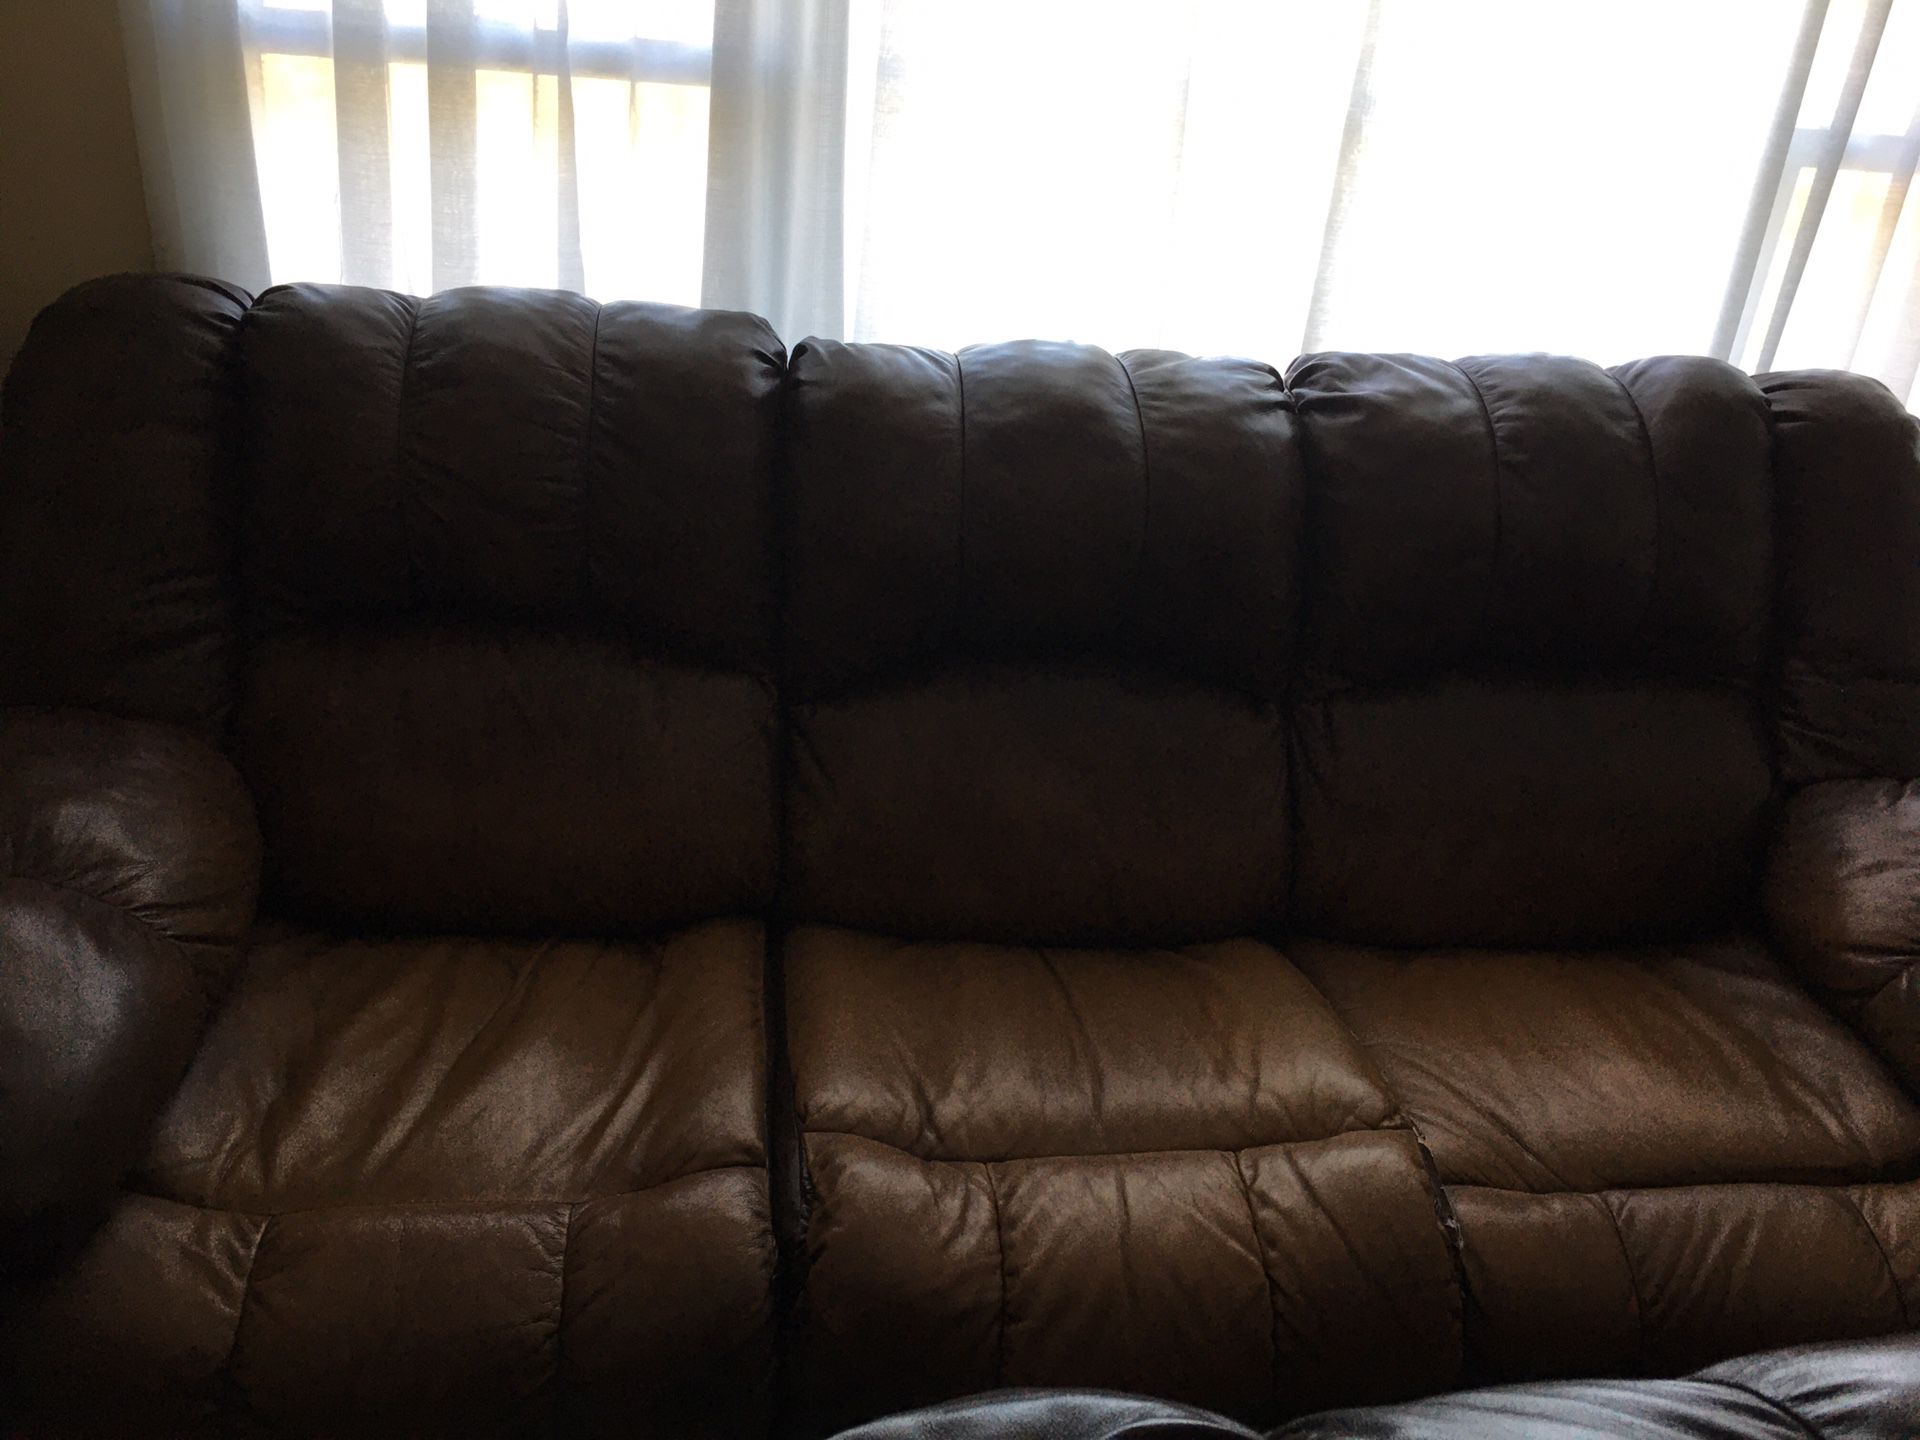 Reclining, leather couch and loveseat